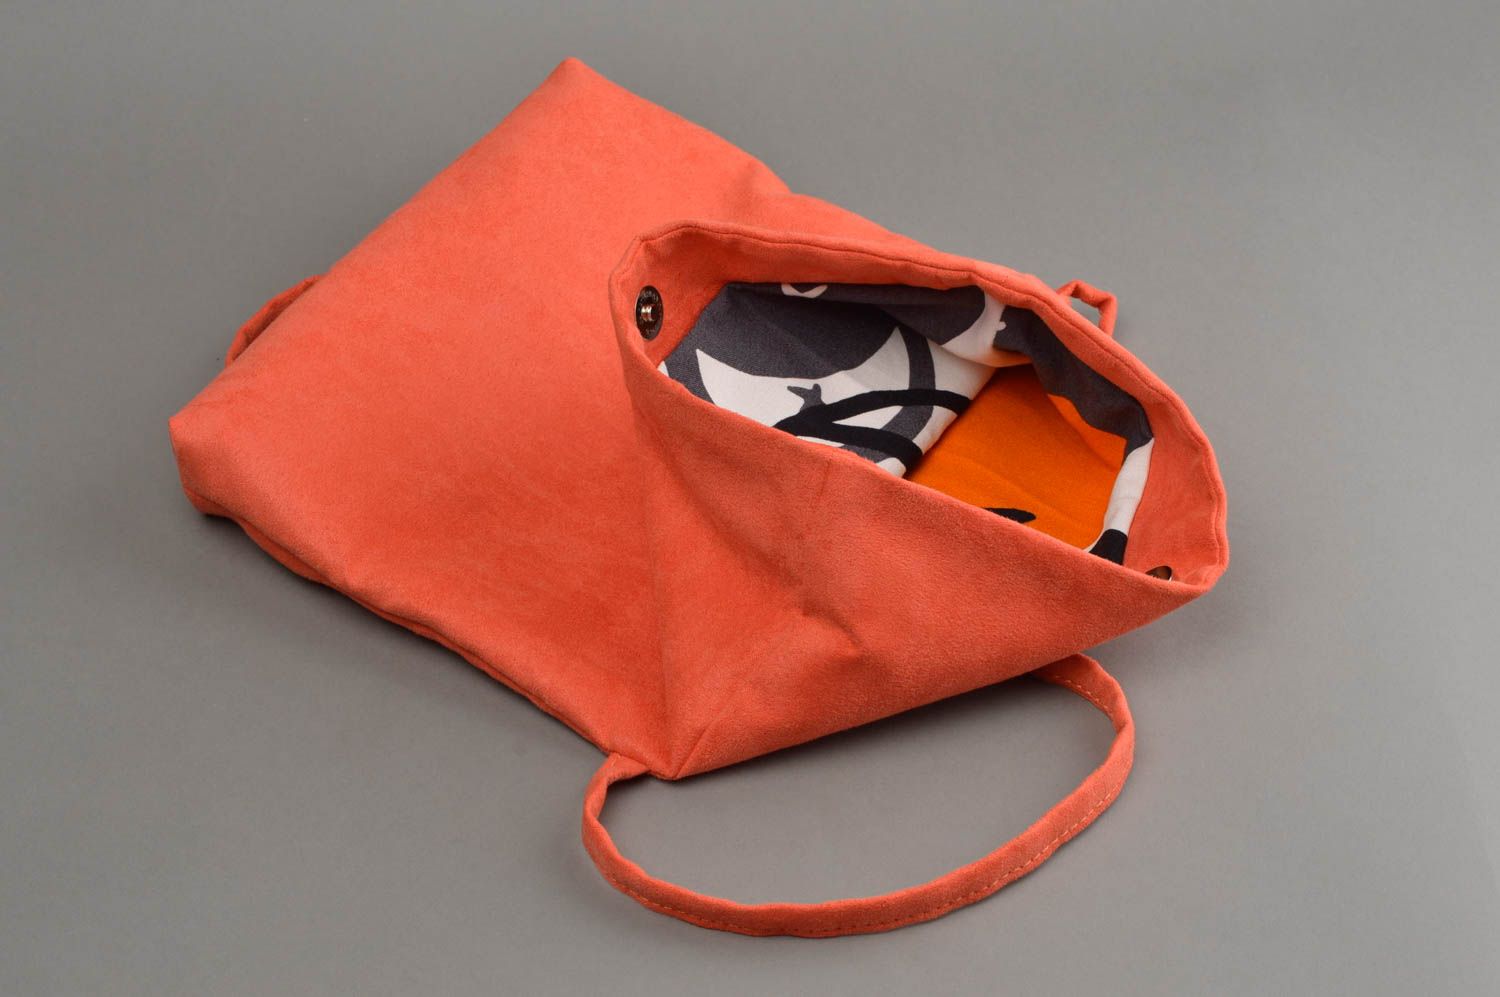 Sewing Bags - THE Bag Sewing Tips You Should Know